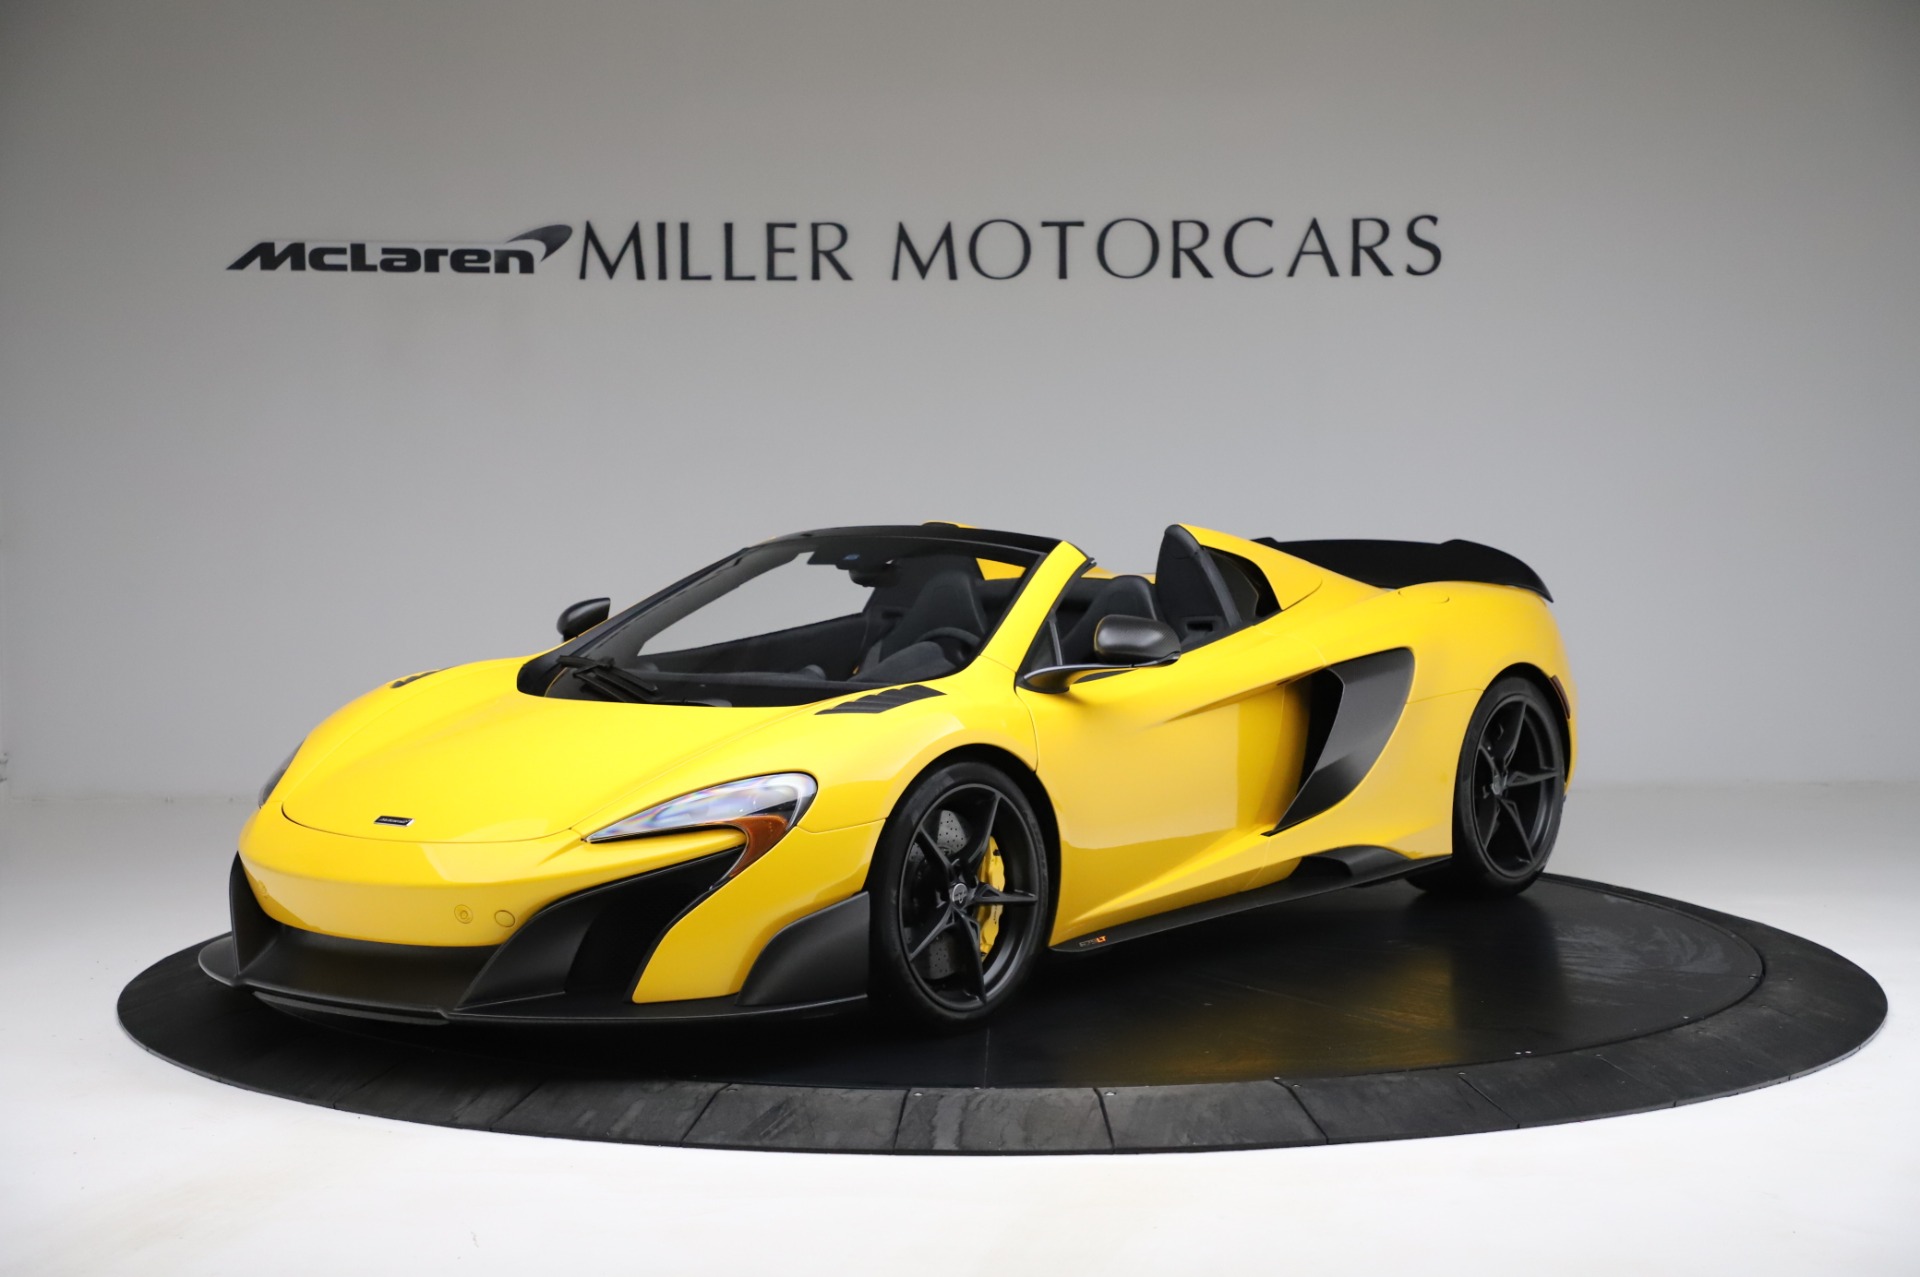 Used 2016 McLaren 675LT Spider for sale Sold at Bentley Greenwich in Greenwich CT 06830 1